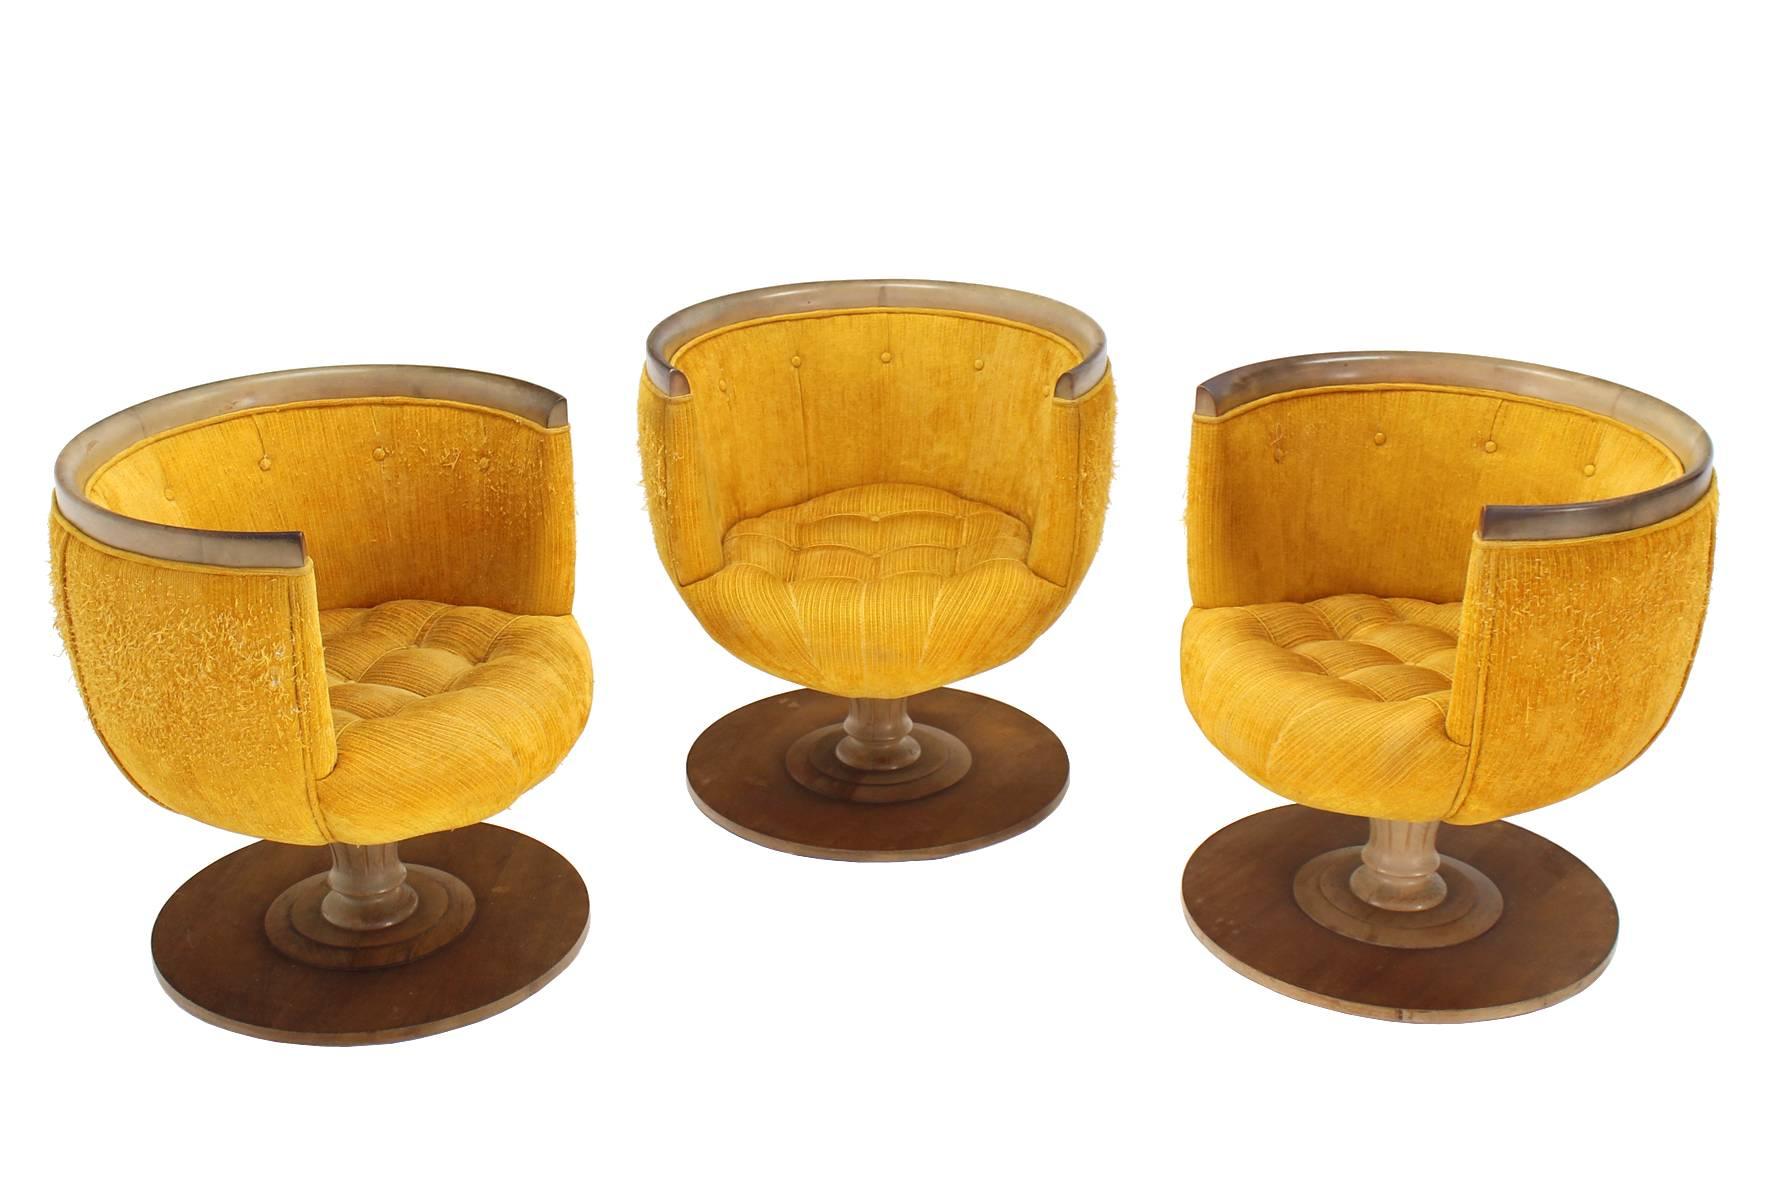 Set of three very nice barrel back revolving chairs sitting on round wooden bases. These are rare outstanding design chairs in good structural condition needing new upholstery.